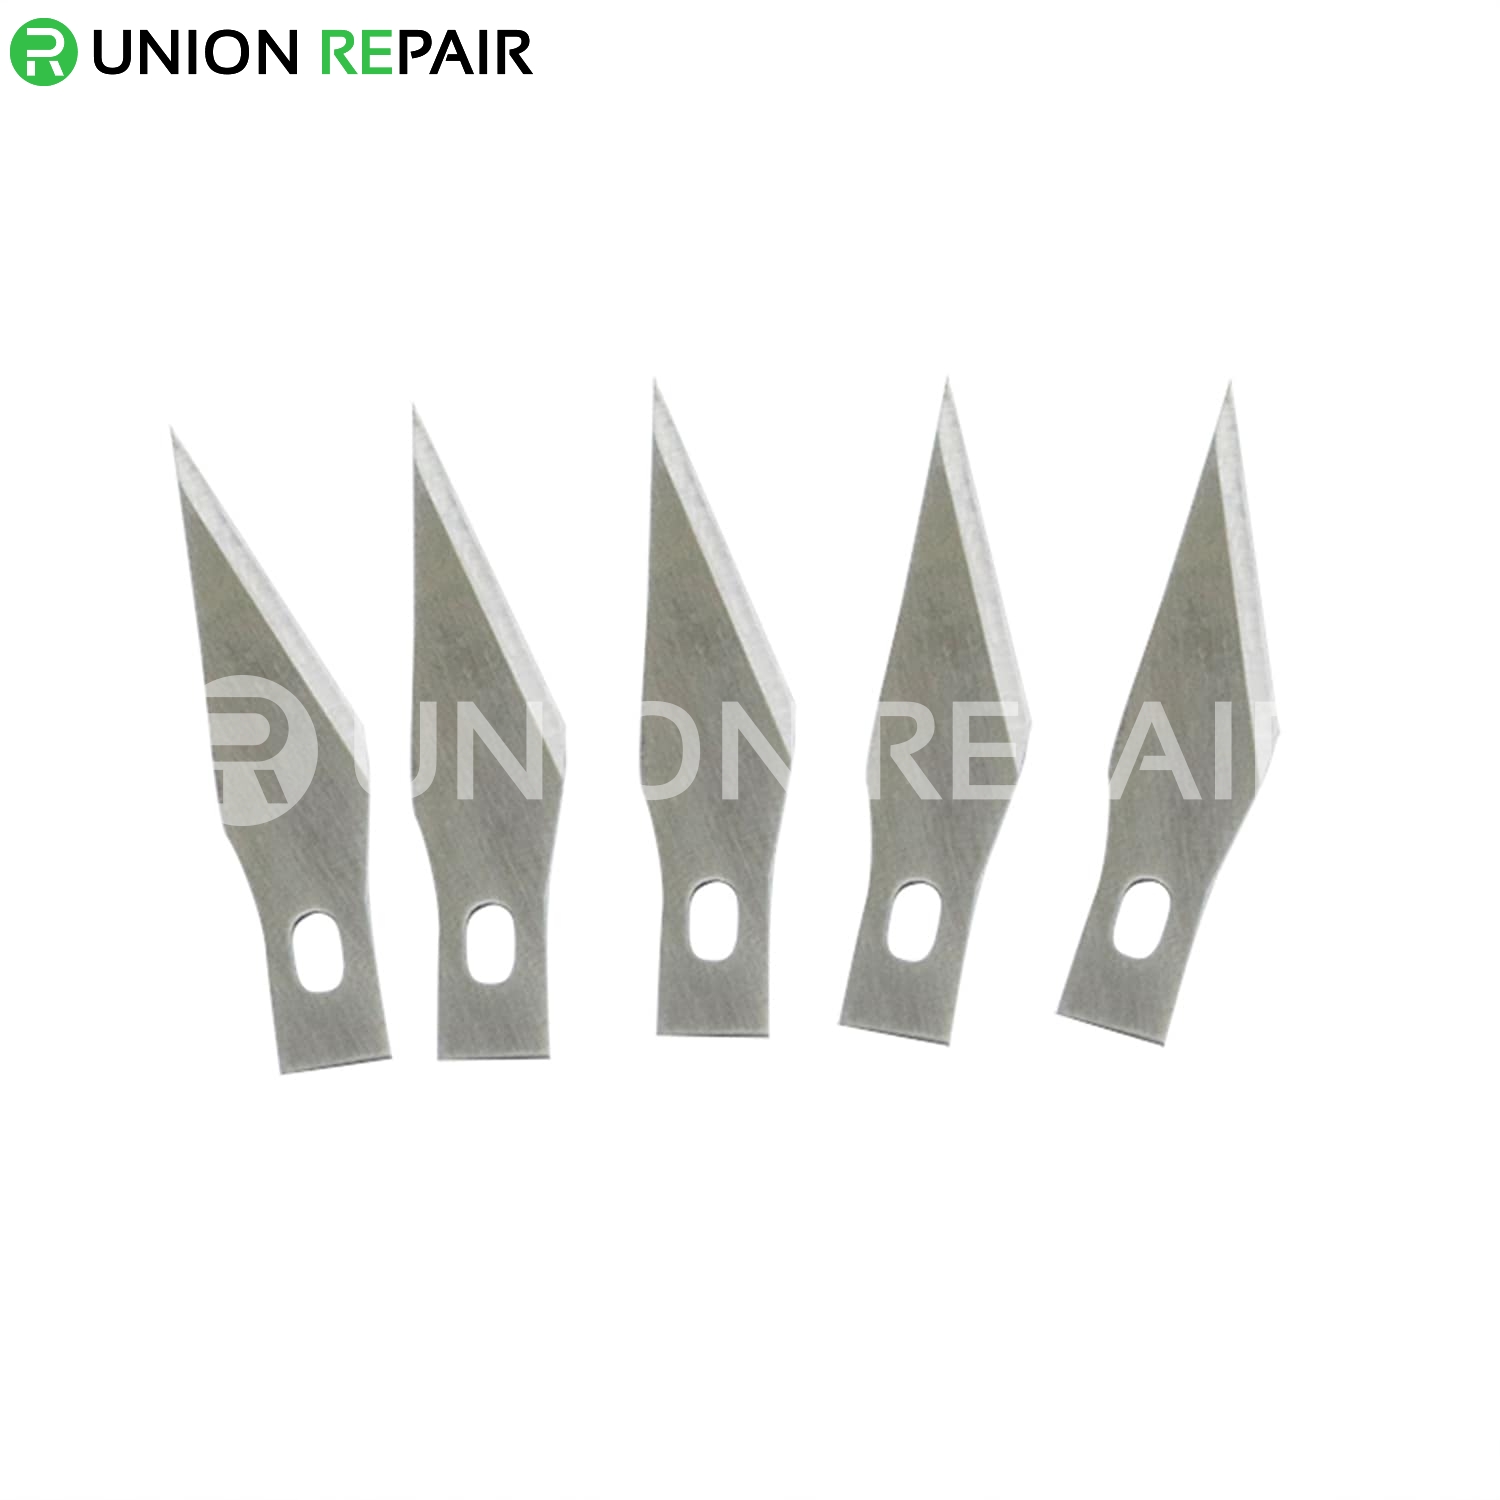 Non-Slip Metal Carving Knife Tool Set (handle with 5pcs #11 blades)